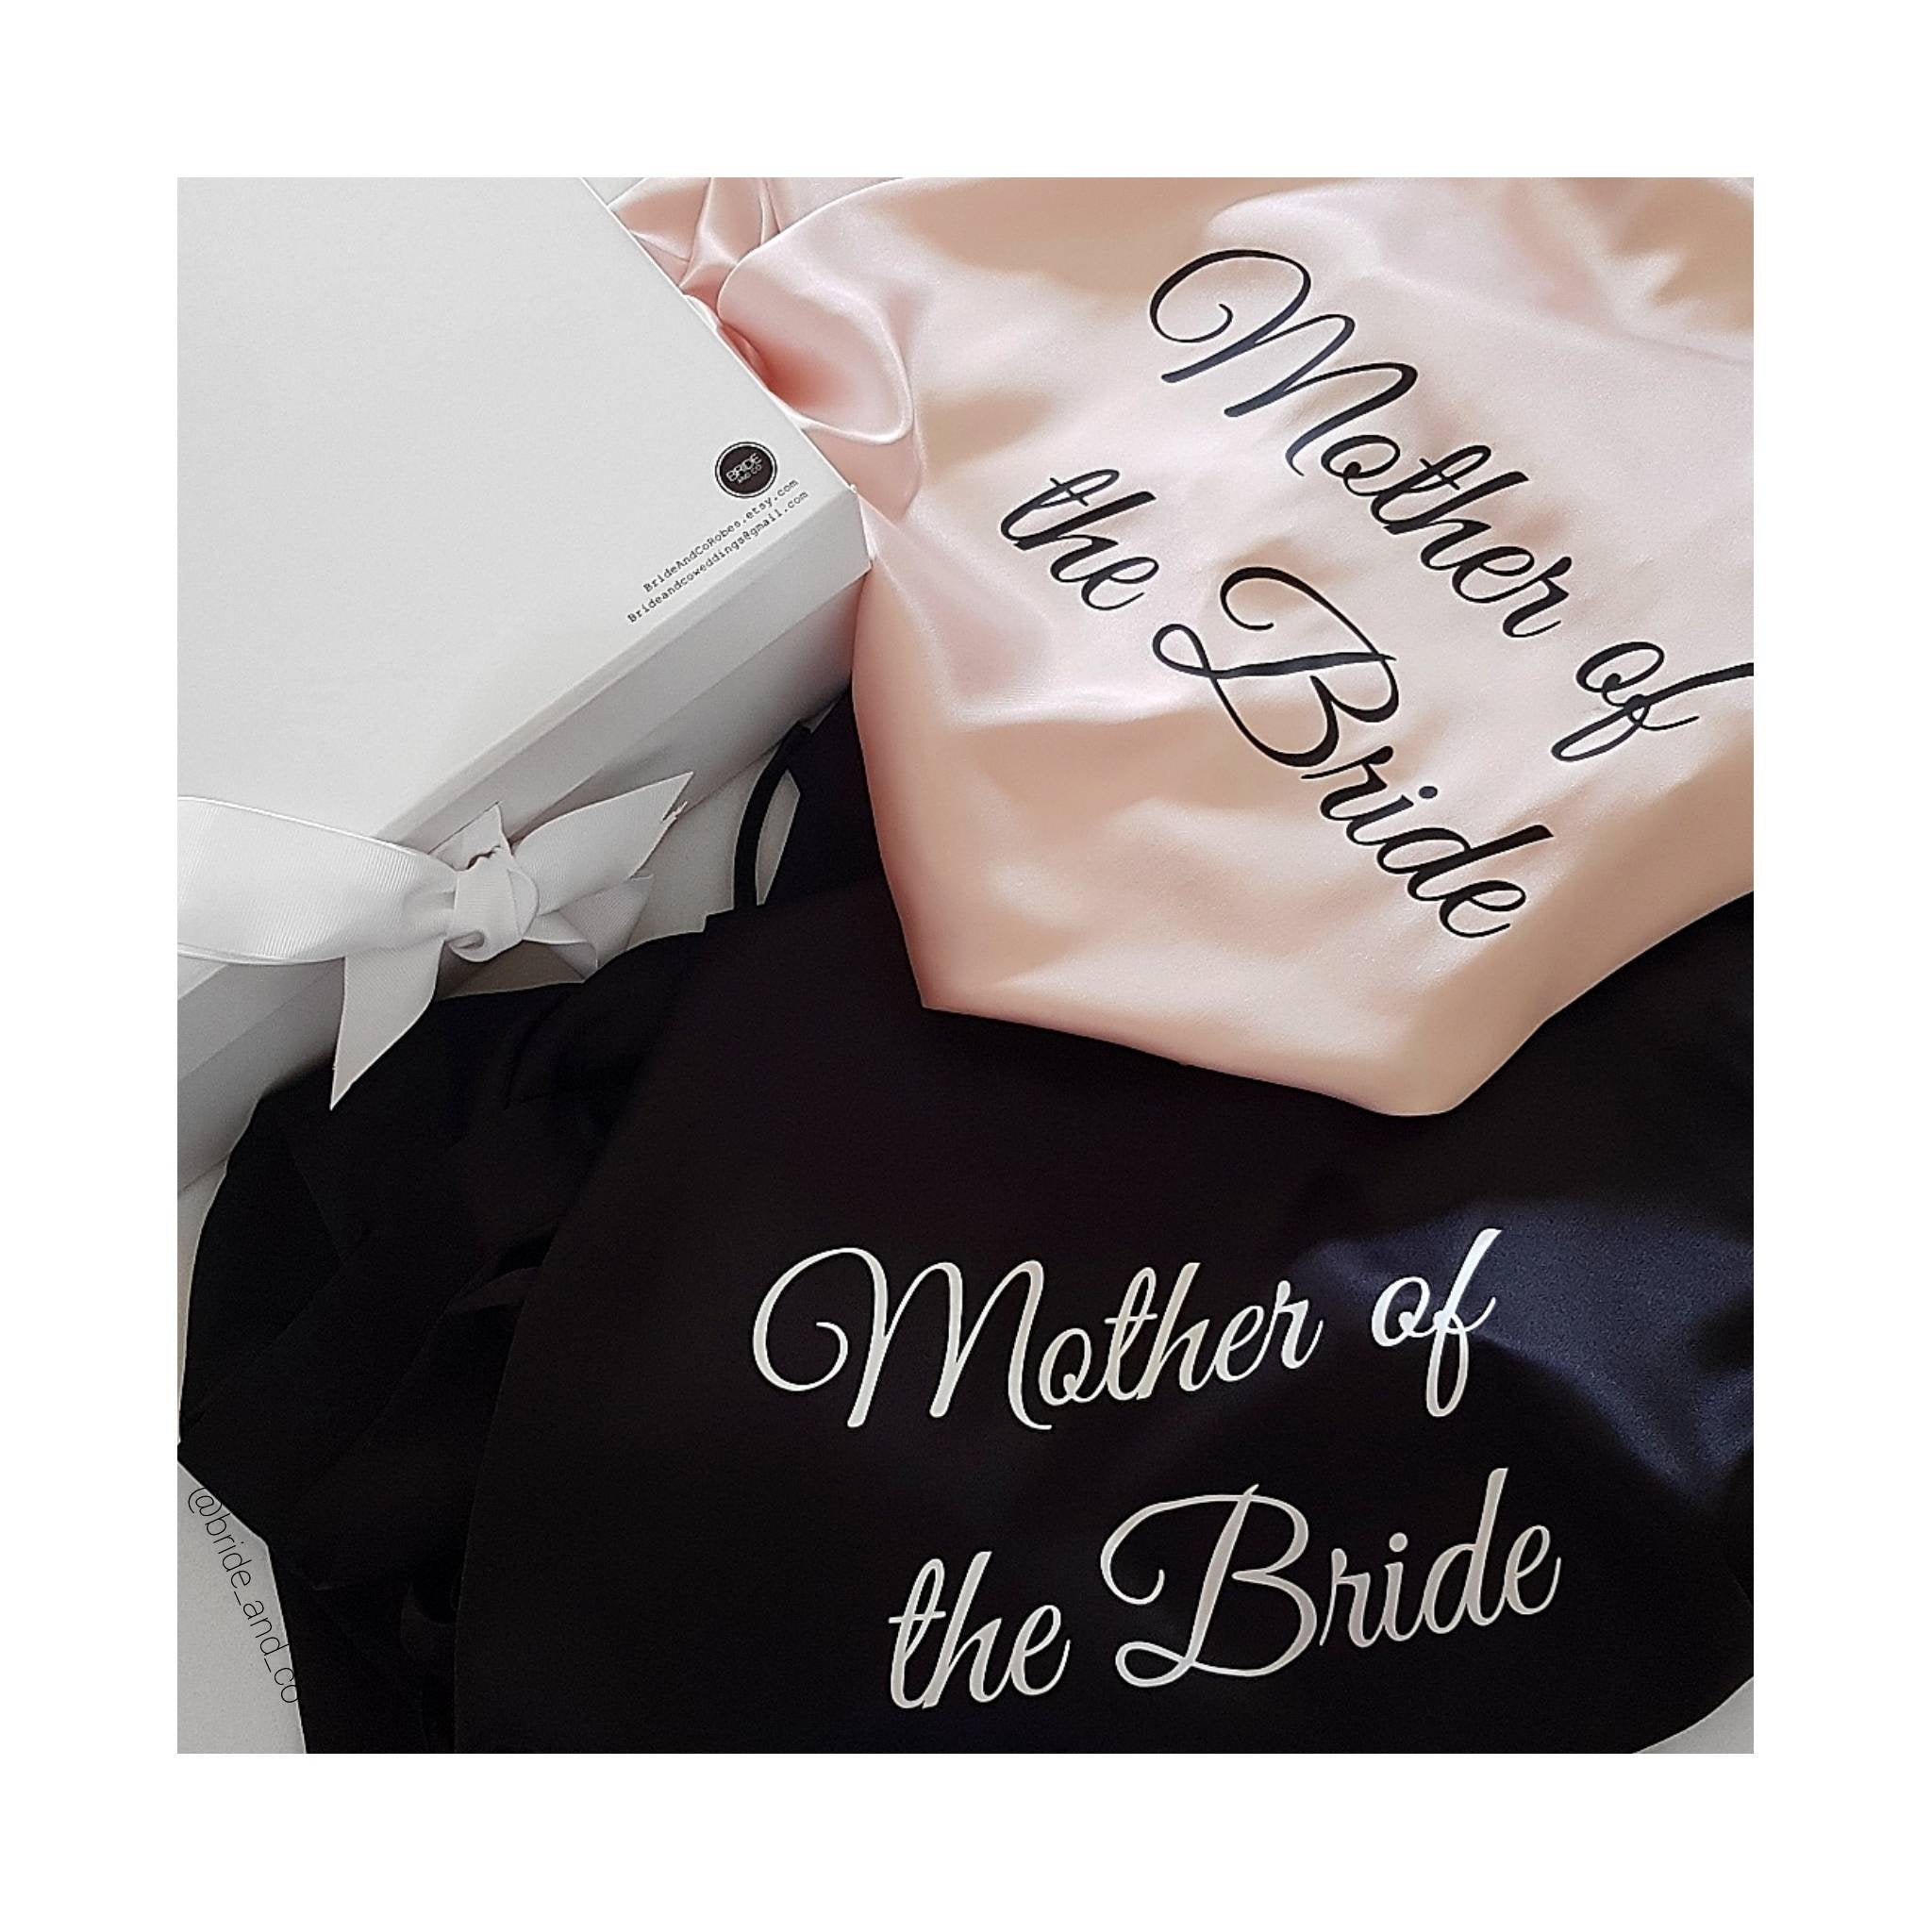 Bridal 'Mother of the Bride' Satin Robe.